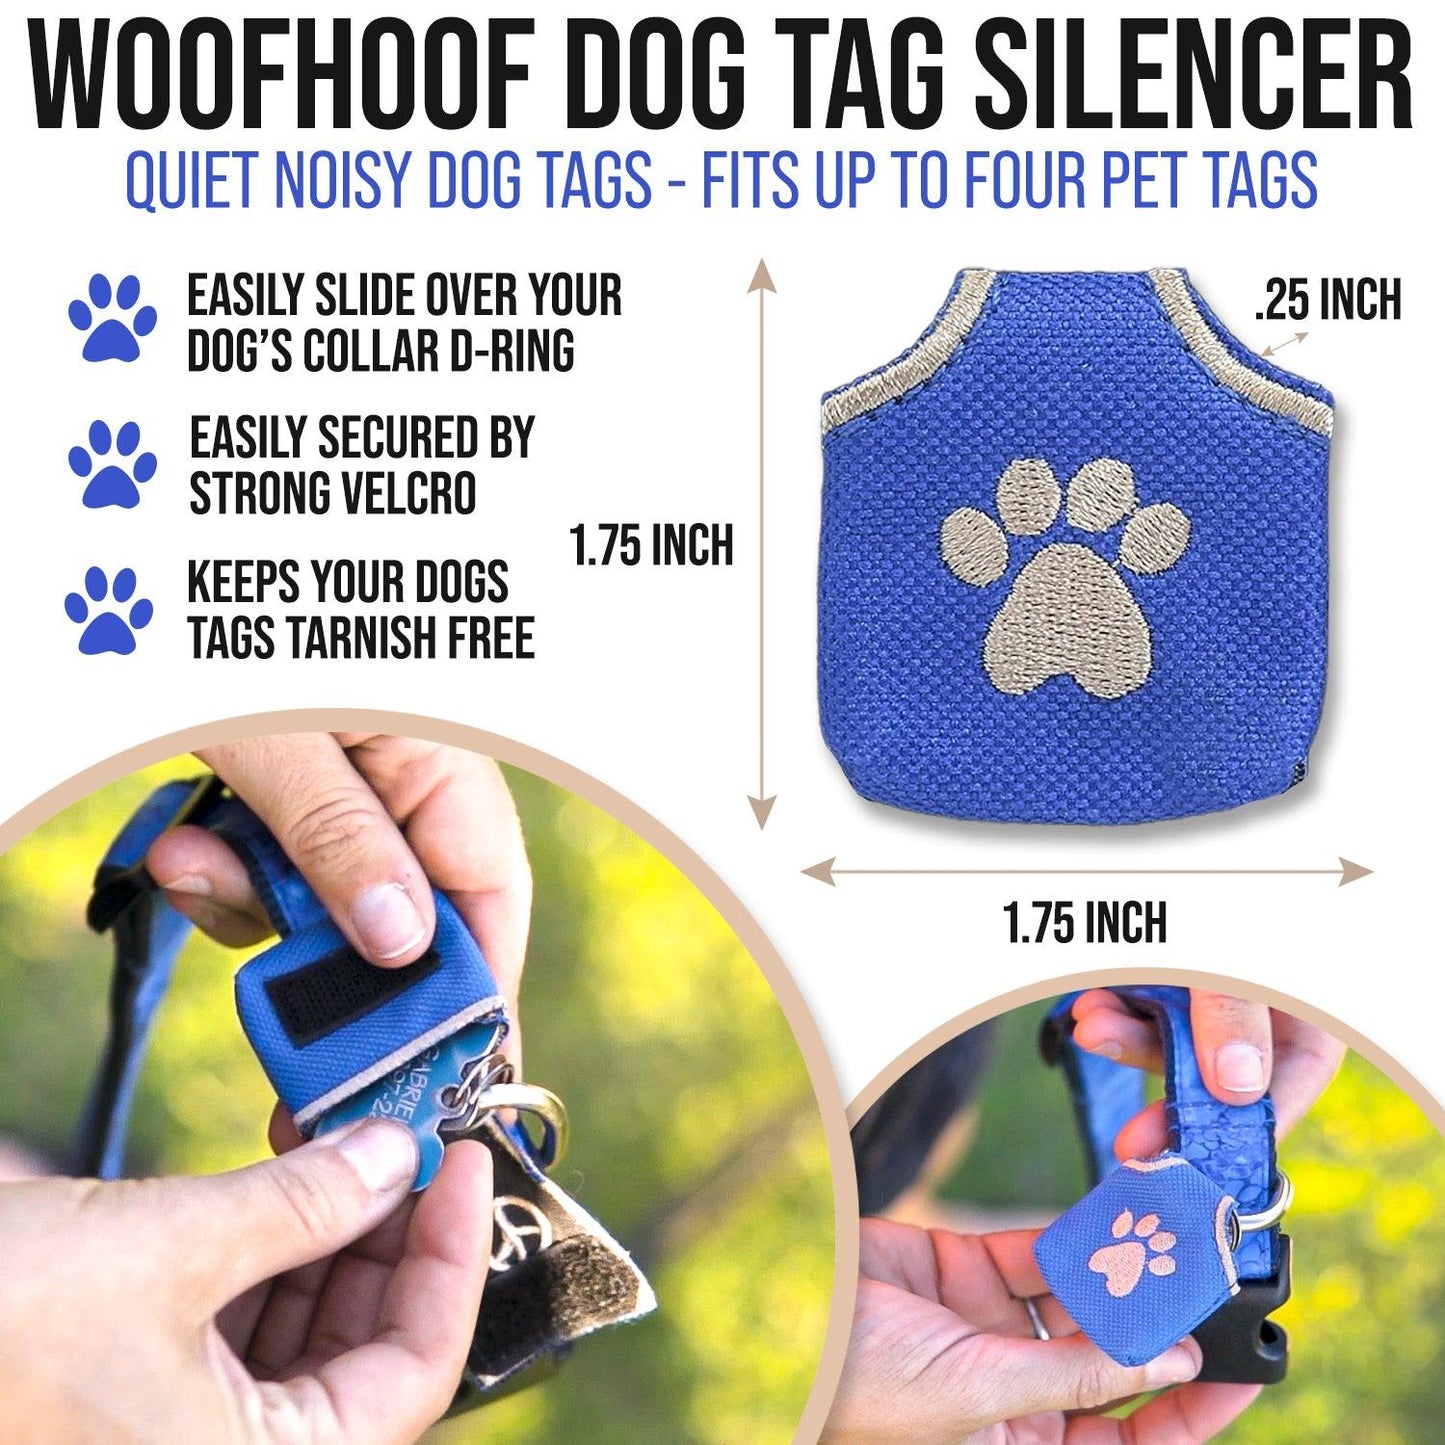 Blue dog tag silencer with use instructions